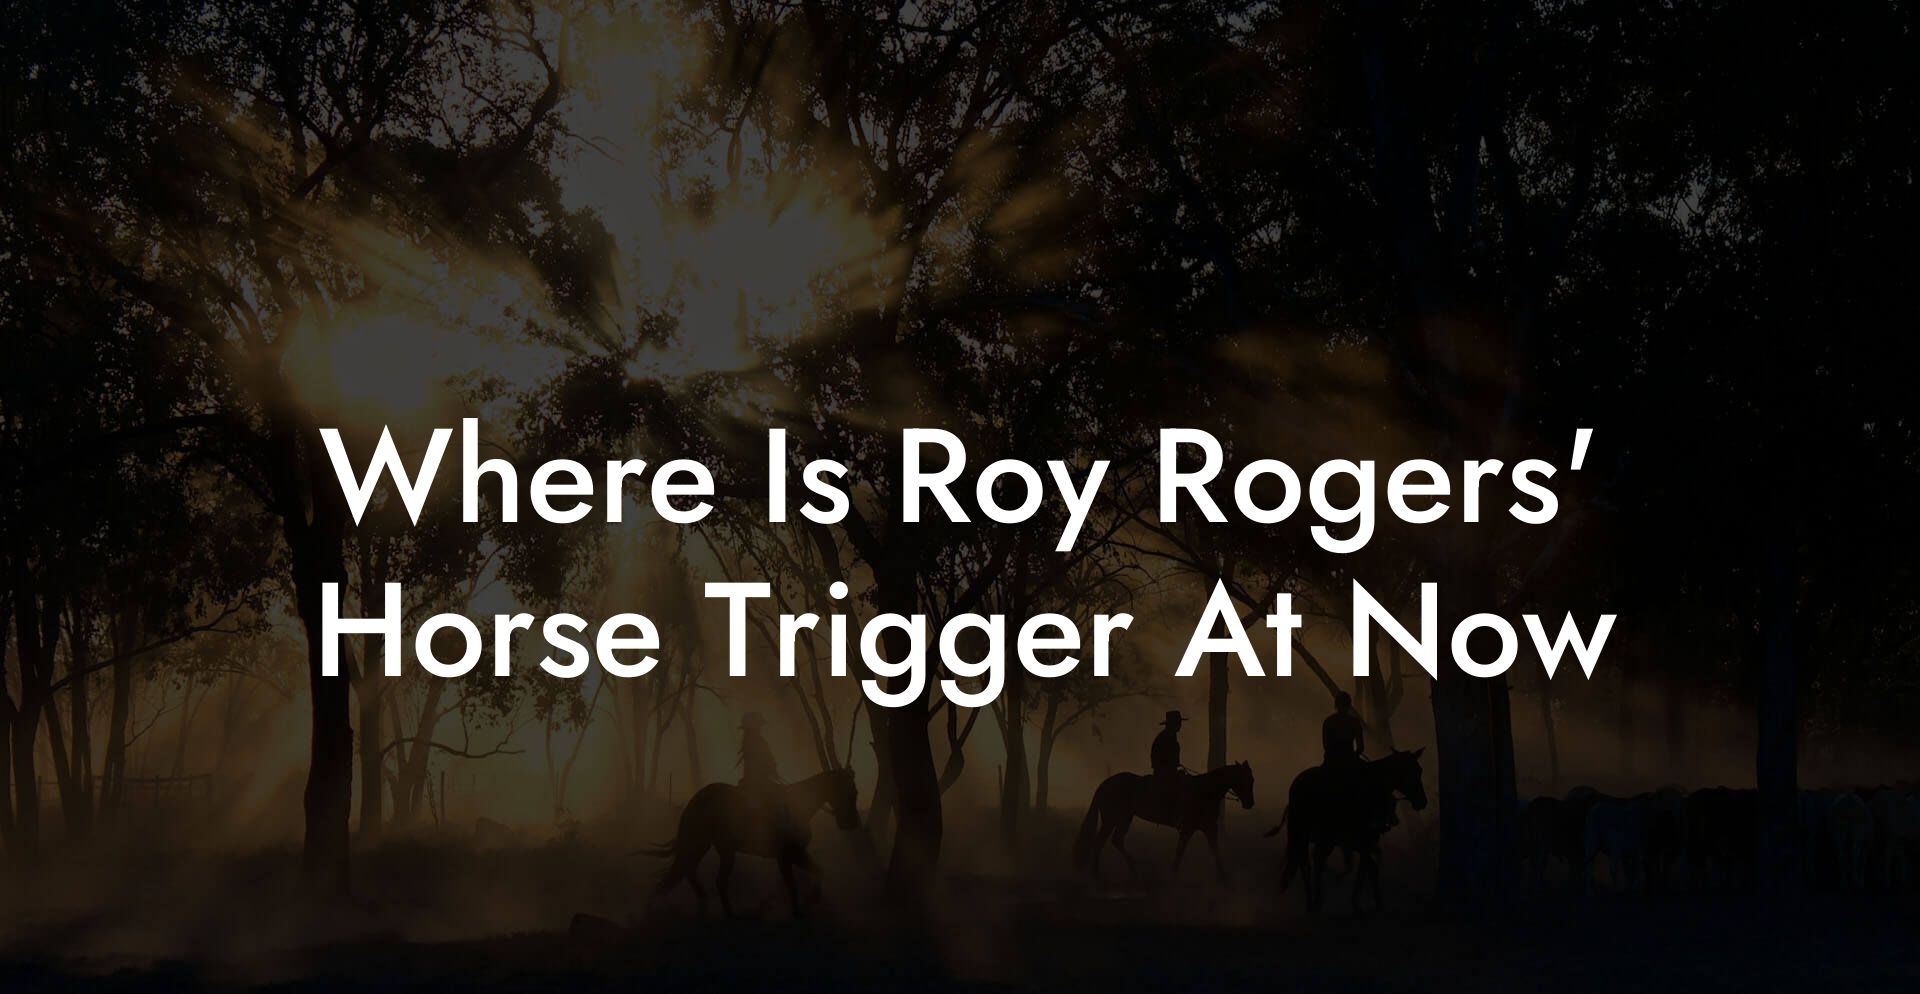 Where Is Roy Rogers' Horse Trigger At Now - How To Own a Horse